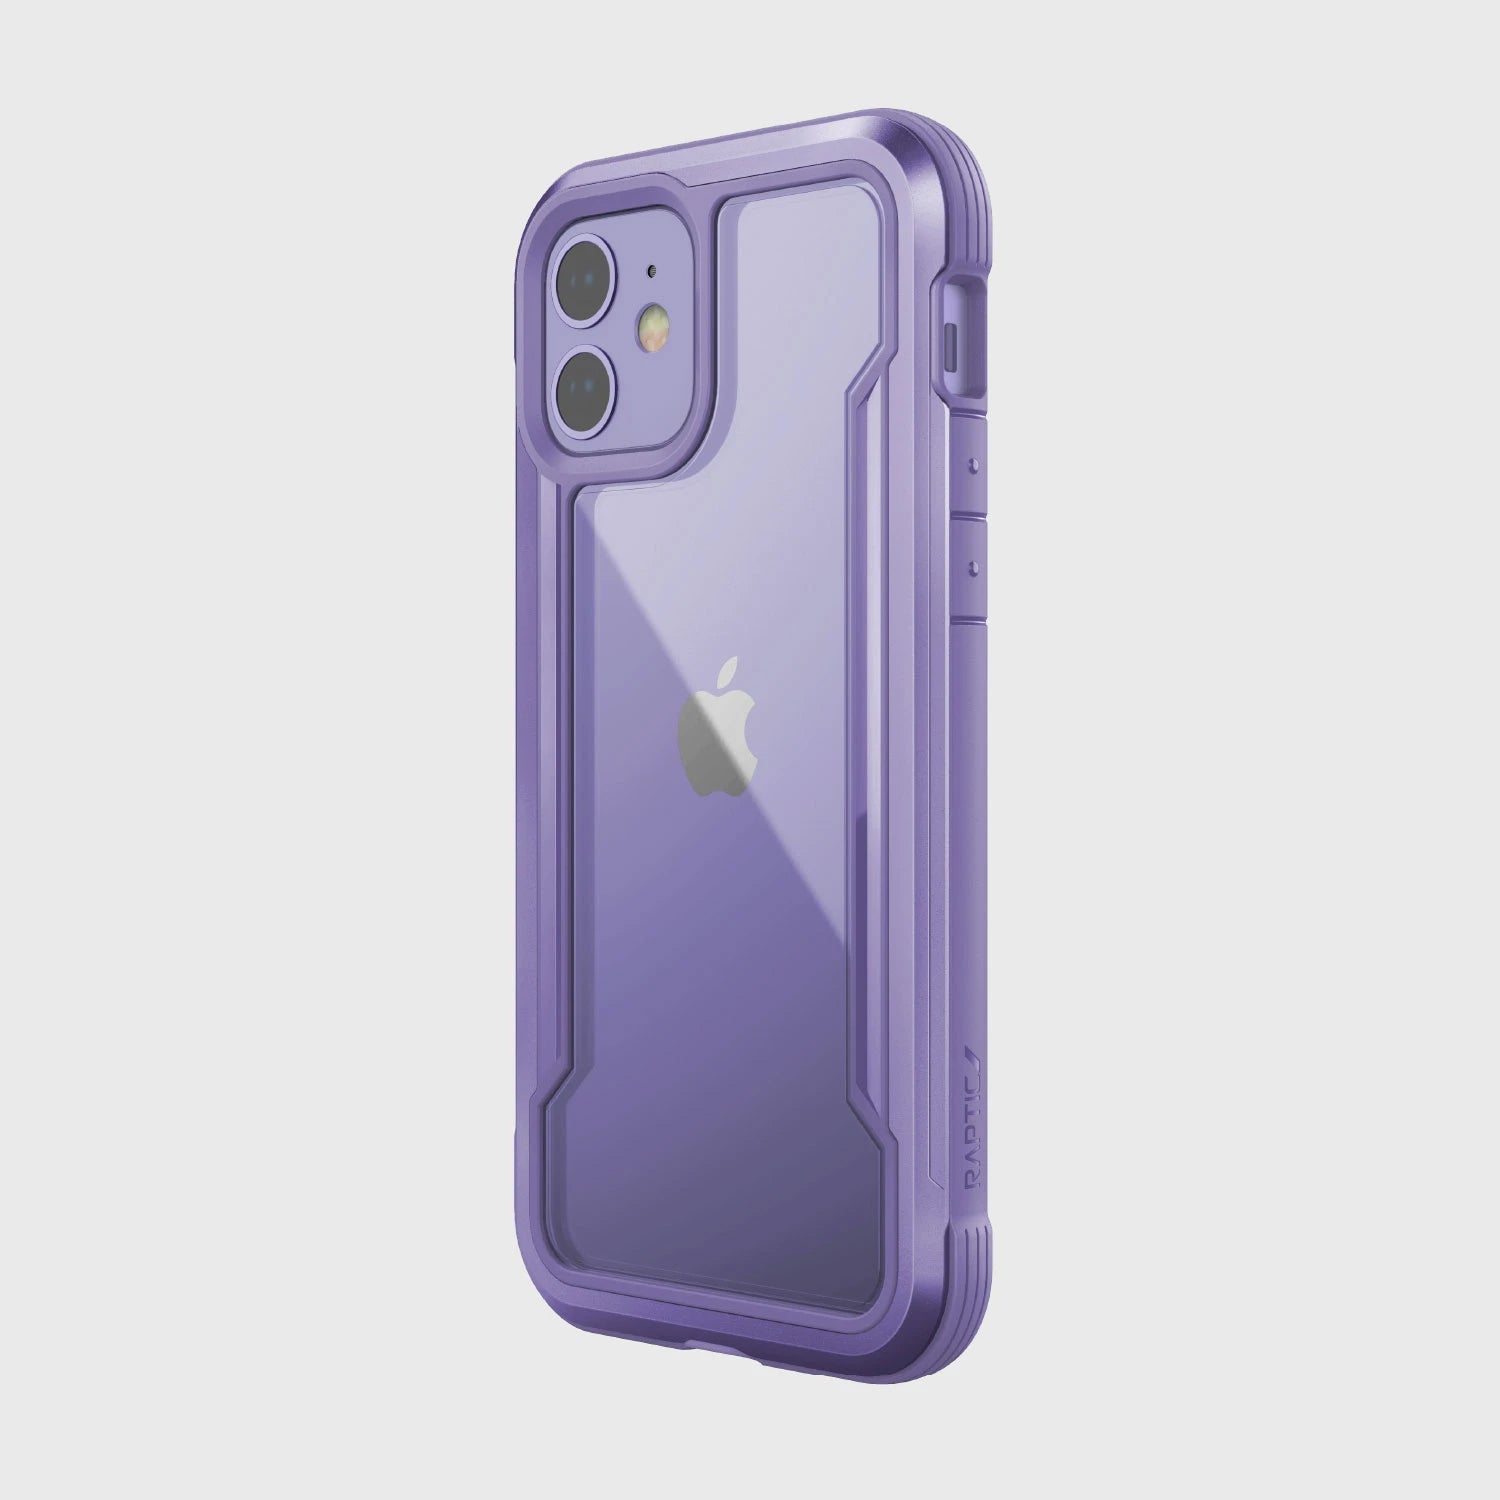 The Raptic SHIELD case for the iPhone 12 Pro Max provides 13’ foot drop protection and is showcased on a white background.